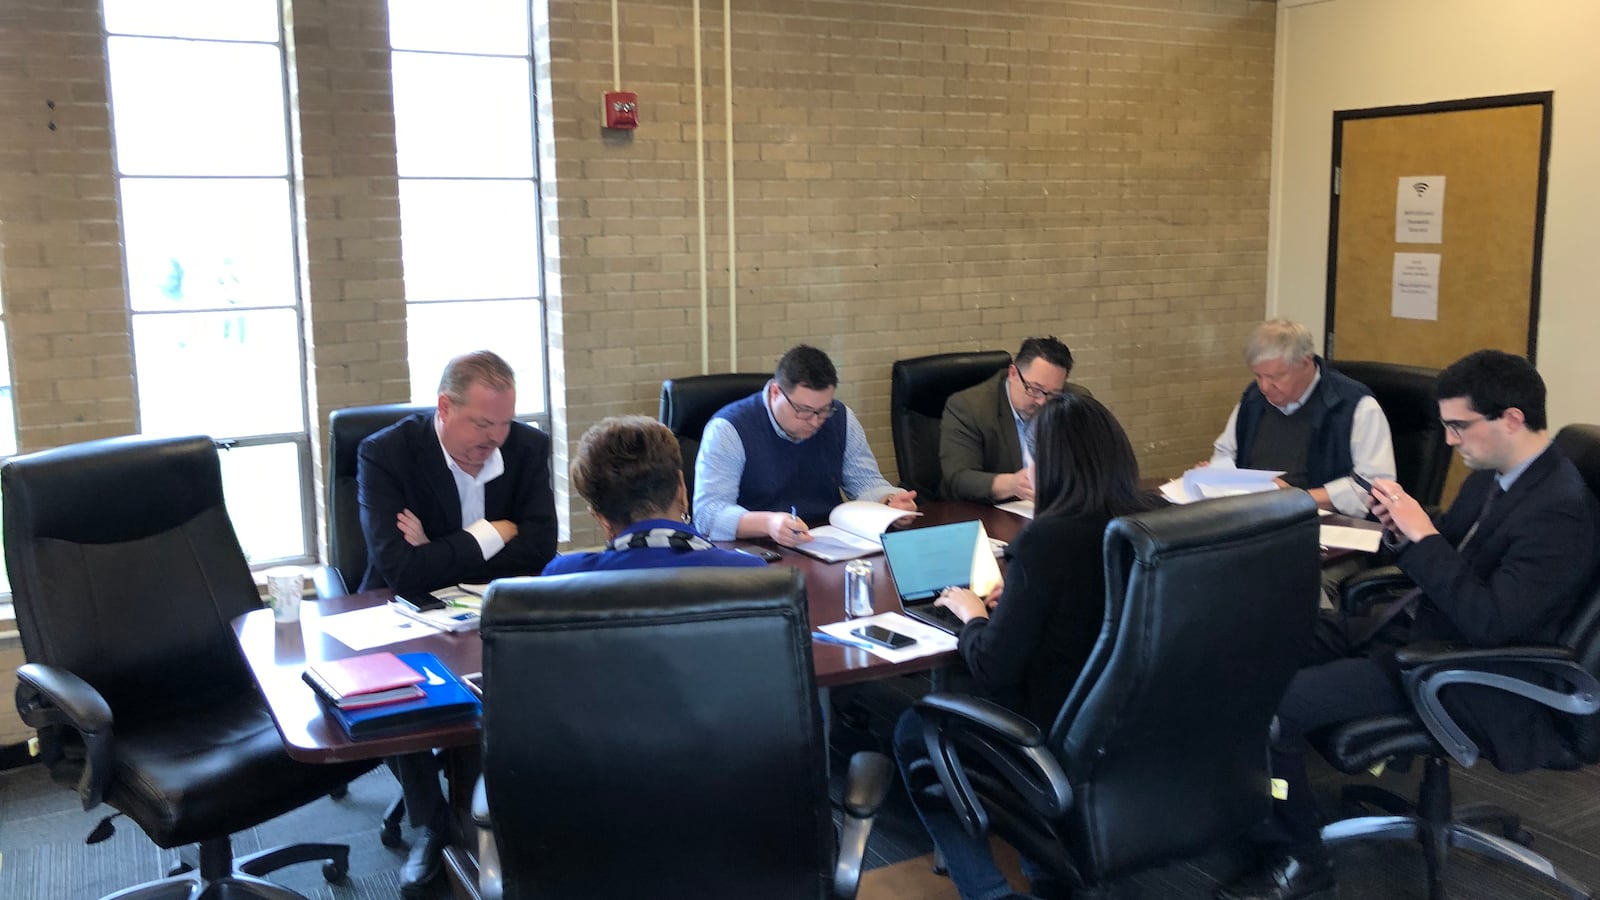 A meeting of the board of Detroit Collegiate Academy, a charter school, on April 18. During the meeting, a social worker urged the board reconsider the expulsion of a student.